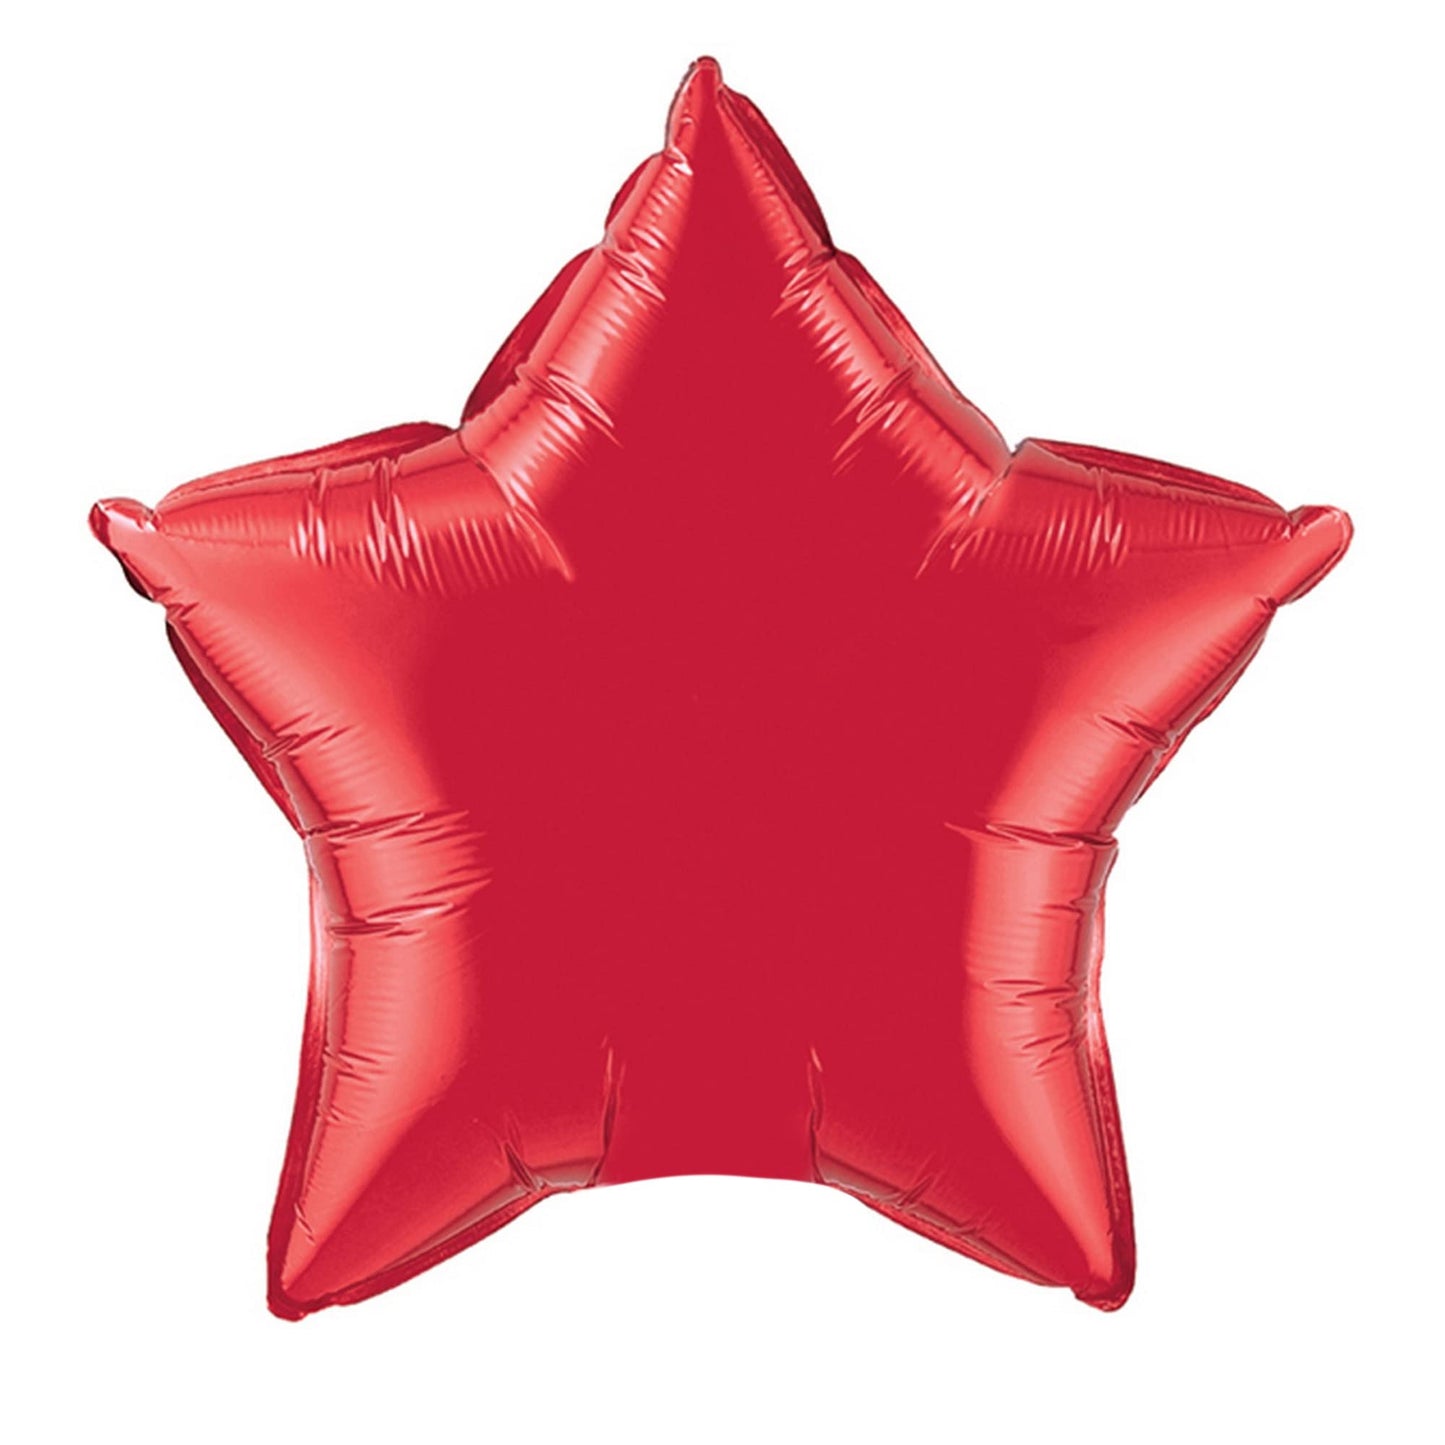 HELIUM-FILLED STAR-SHAPED FOIL BALLOONS